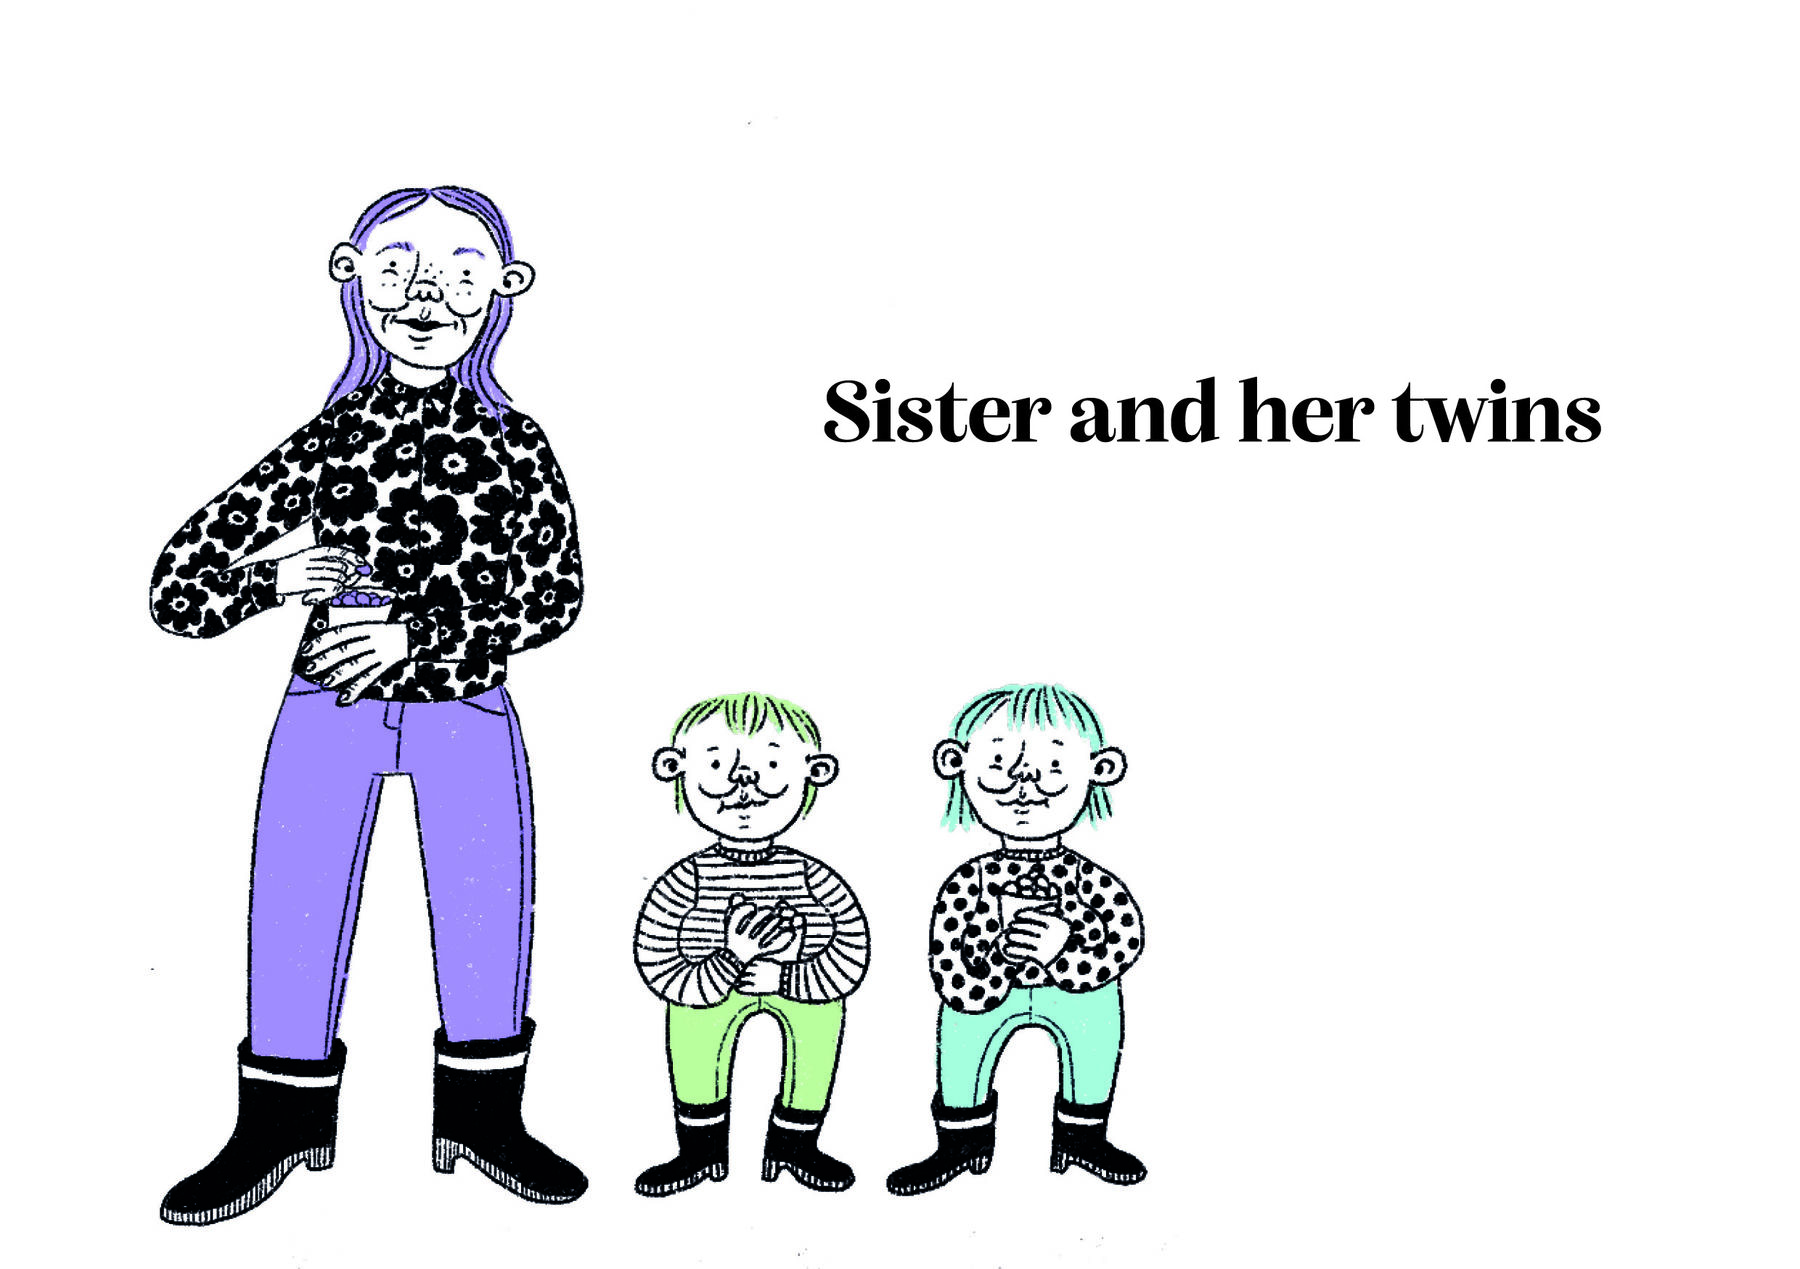 an illustration of sister and her twin children